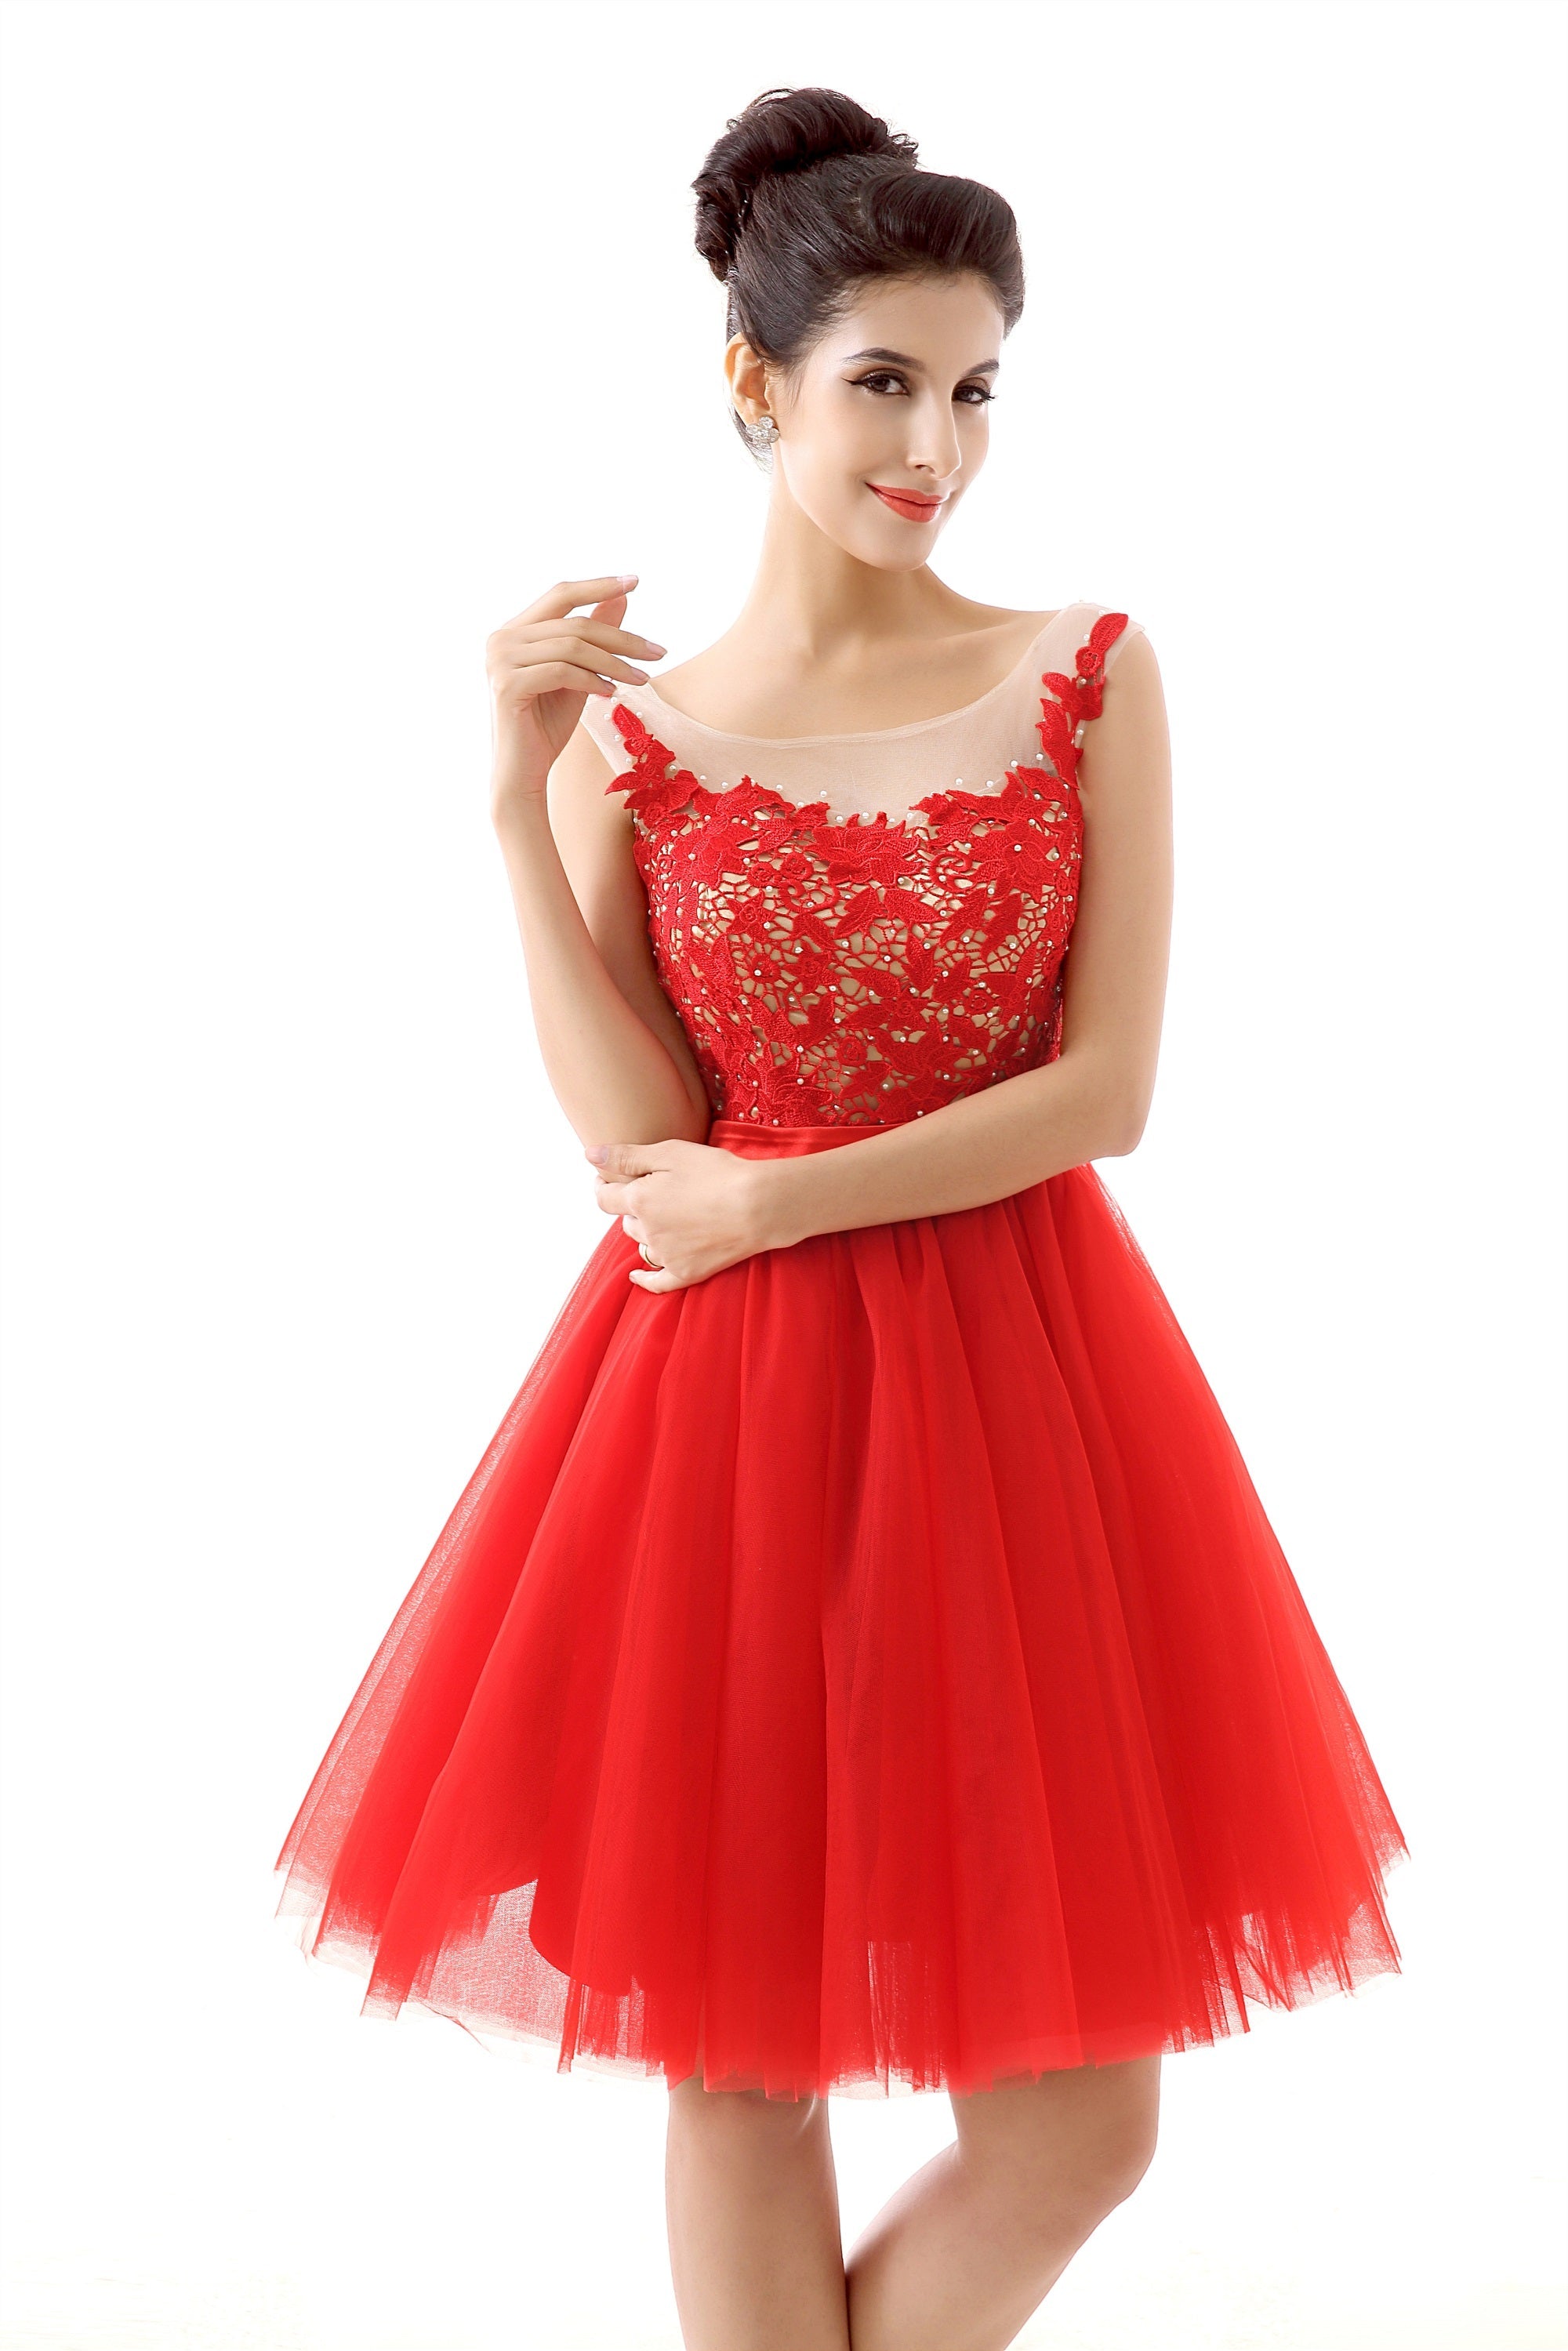 Party Dress Miami, Lace Cute Red Short Homecoming Dresses